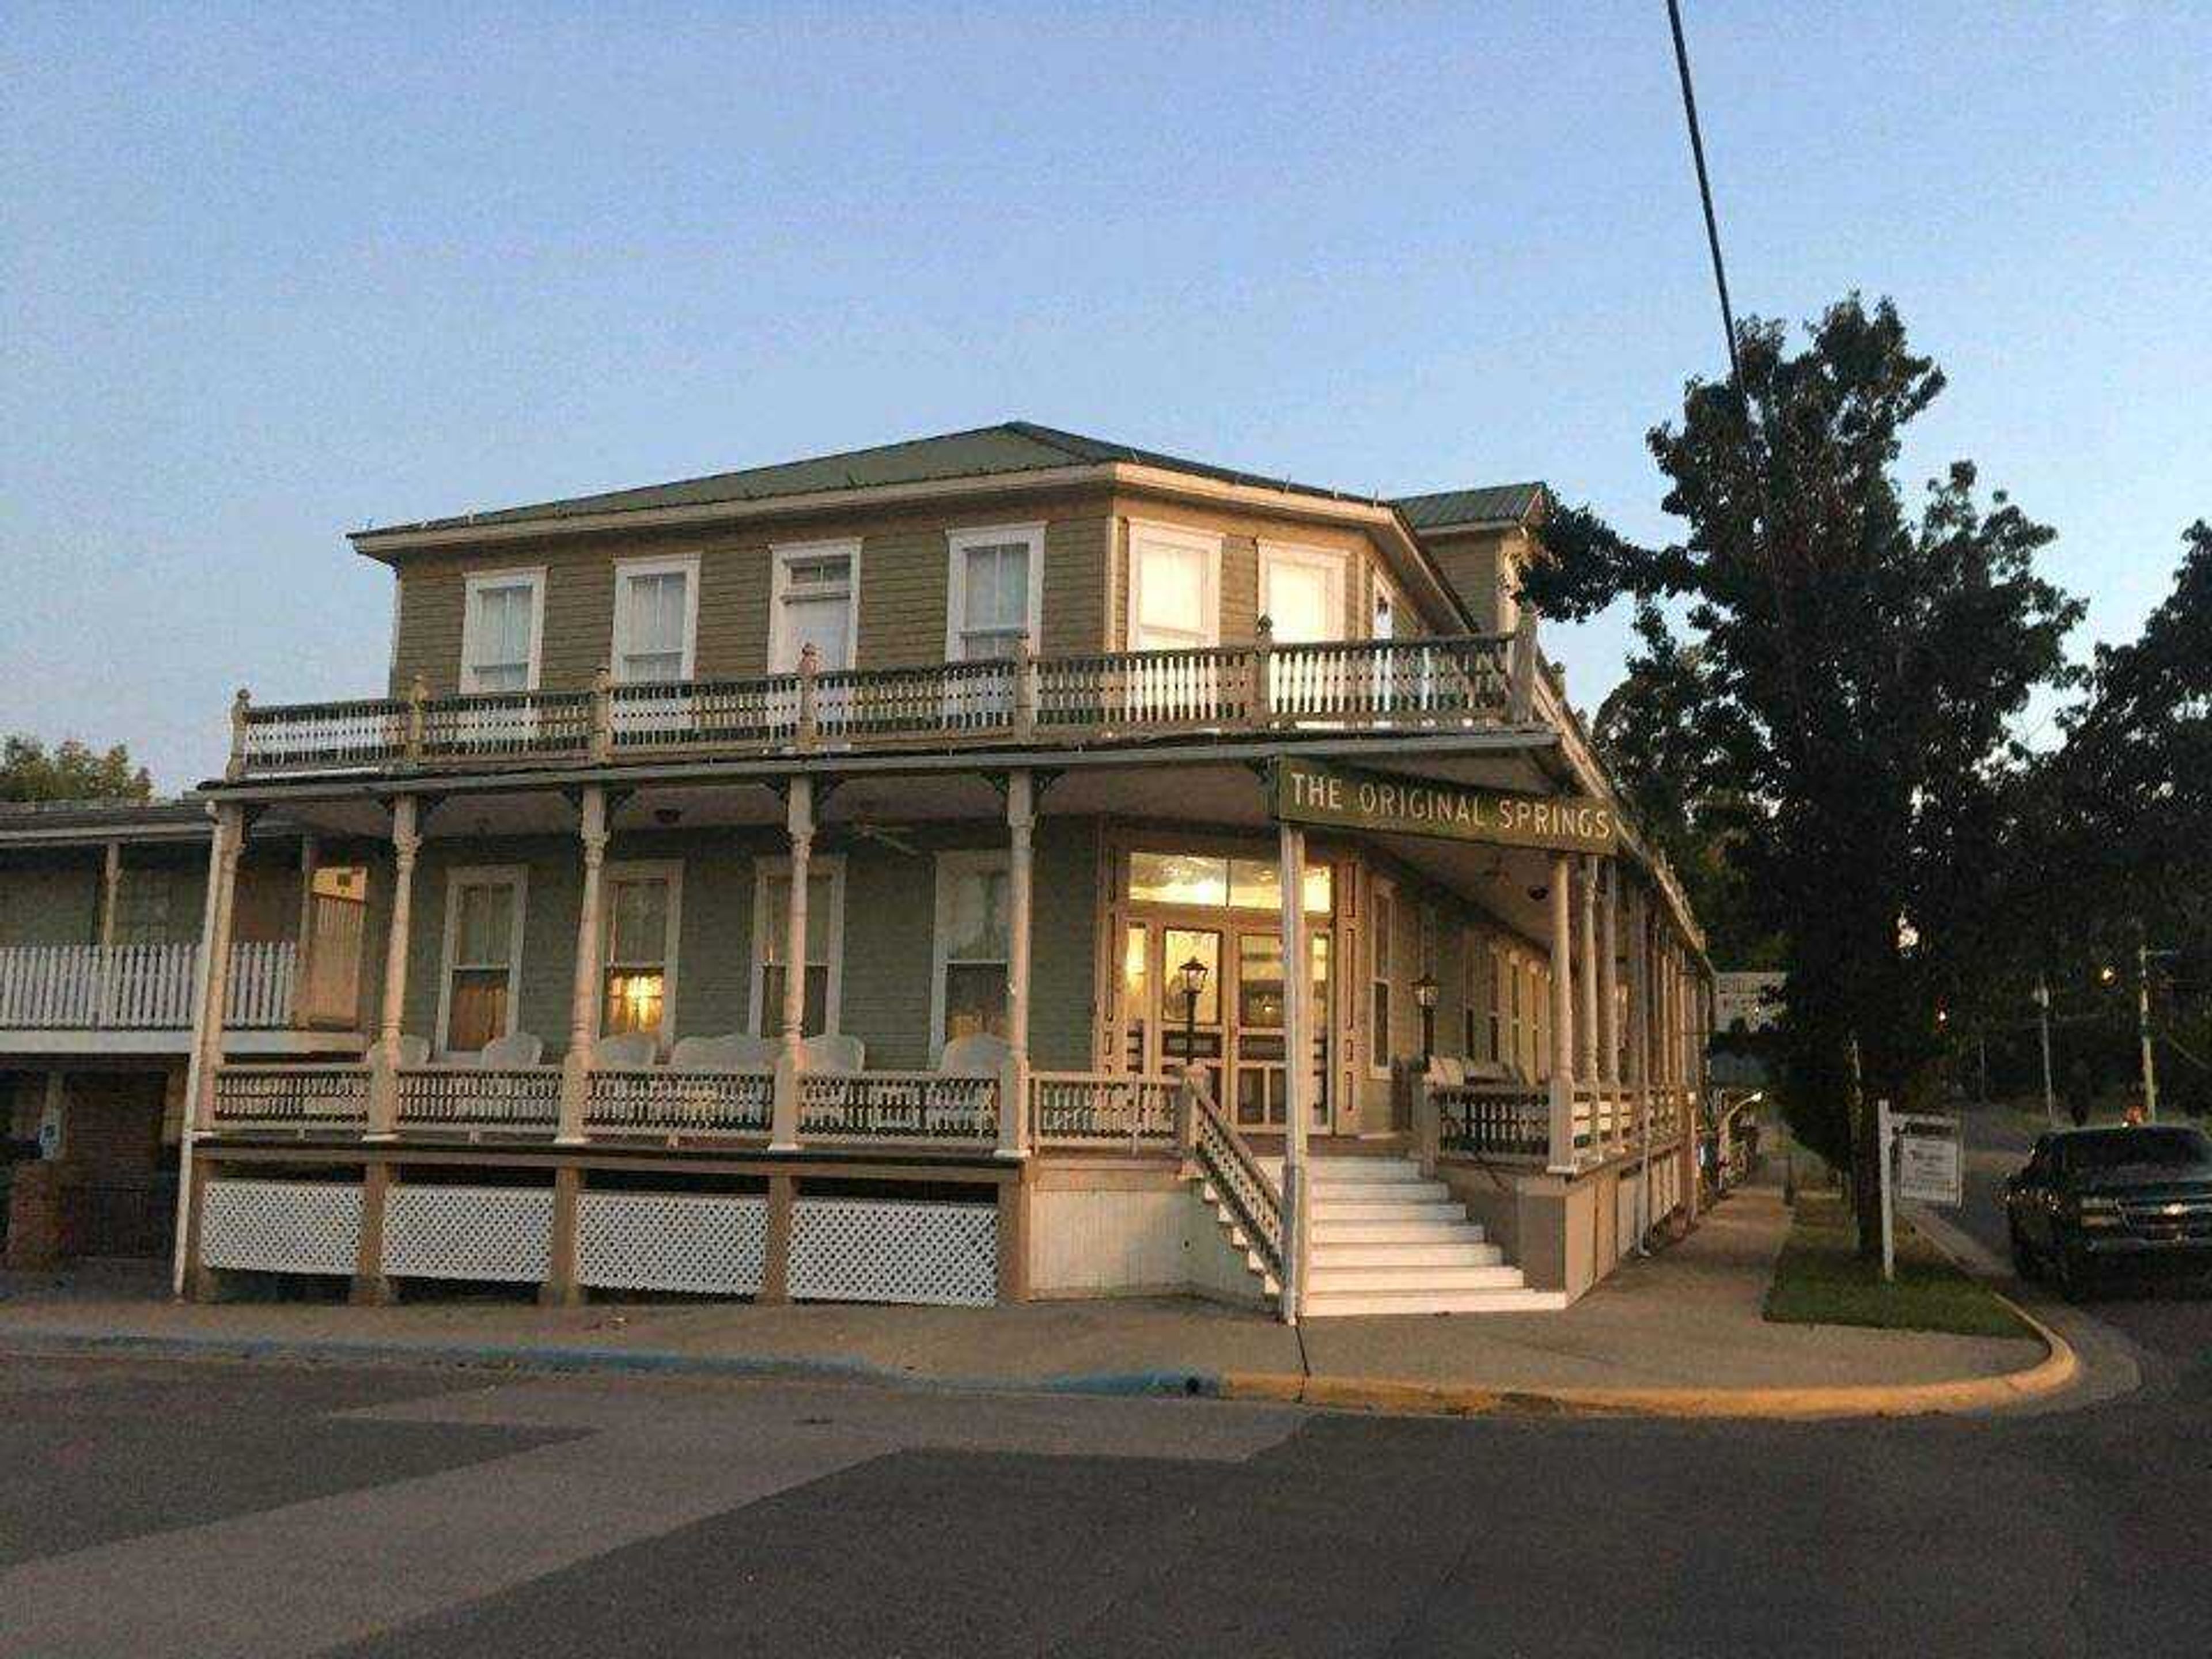 The Original Springs hotel is located in Okawville, IL and has been open since 1867. The tales of mystery and hauntings goes back to the early 1900s.